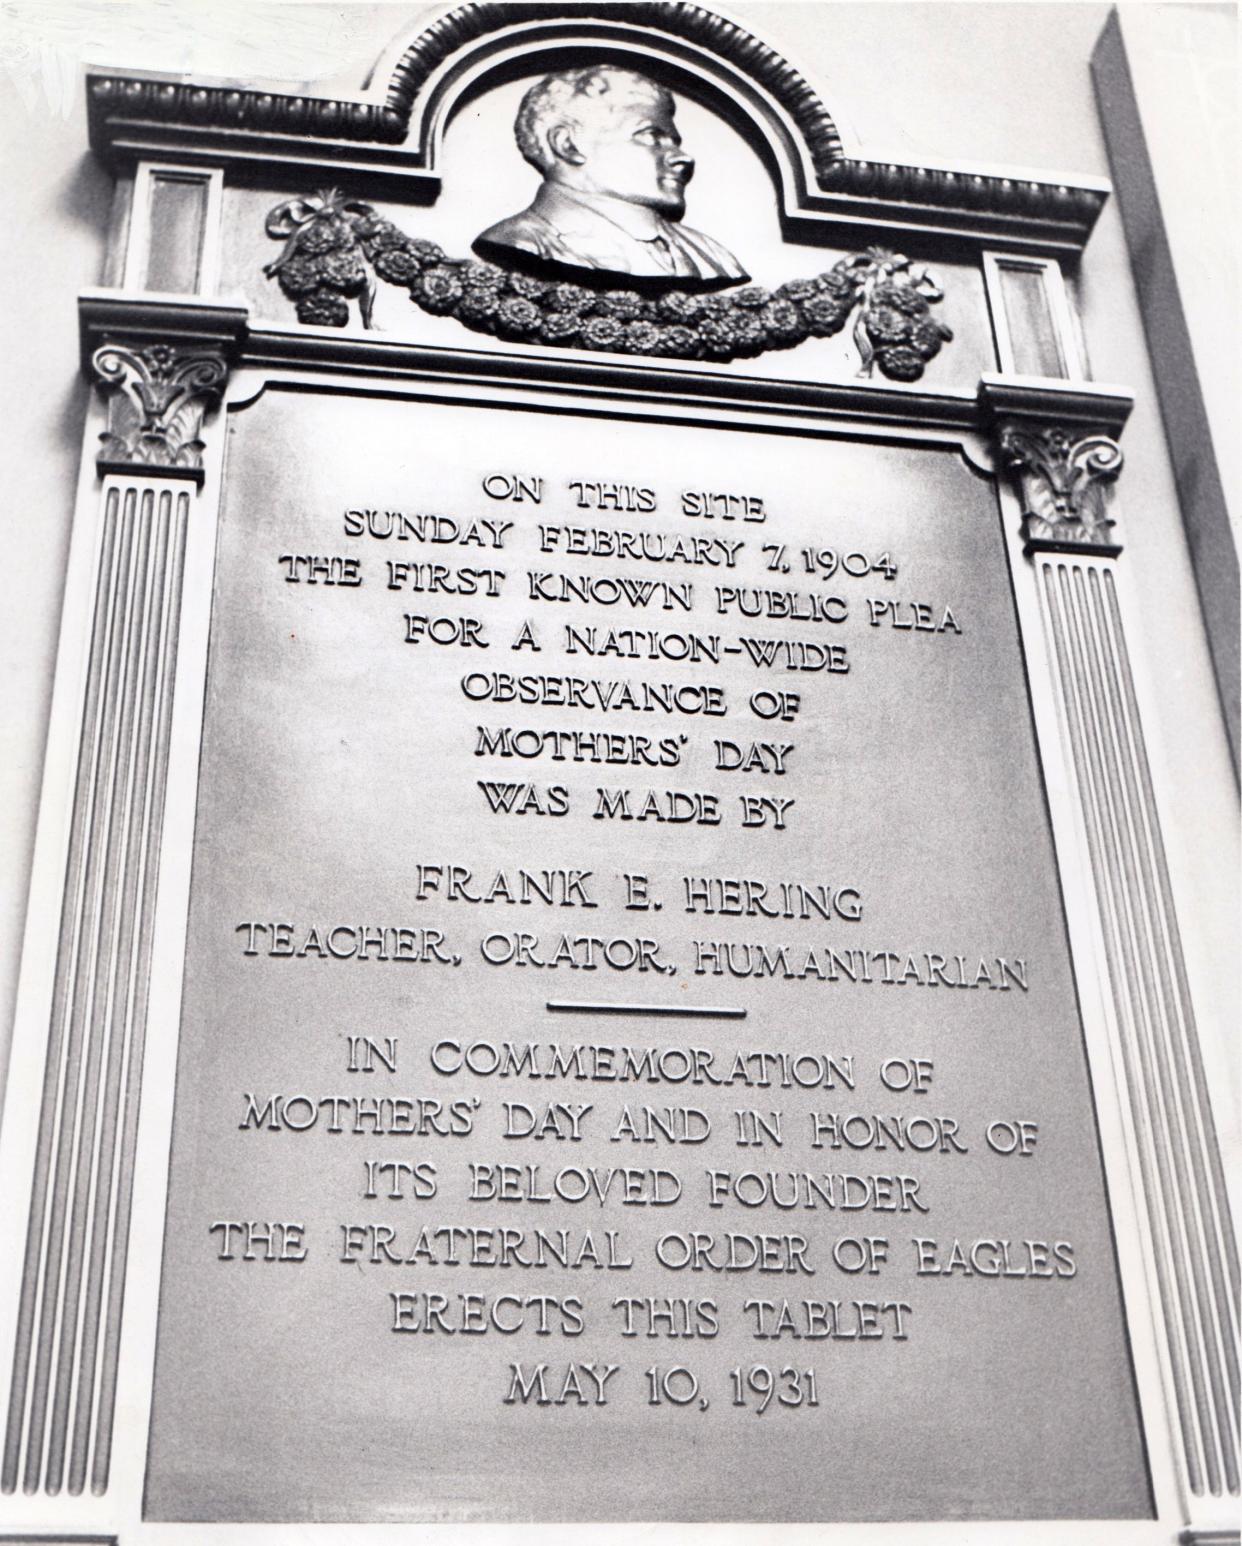 This plaque in the lobby of the English Opera House commemorates the first public plea for "Mother's Day," made during a speech in 1904 by Frank Hering.